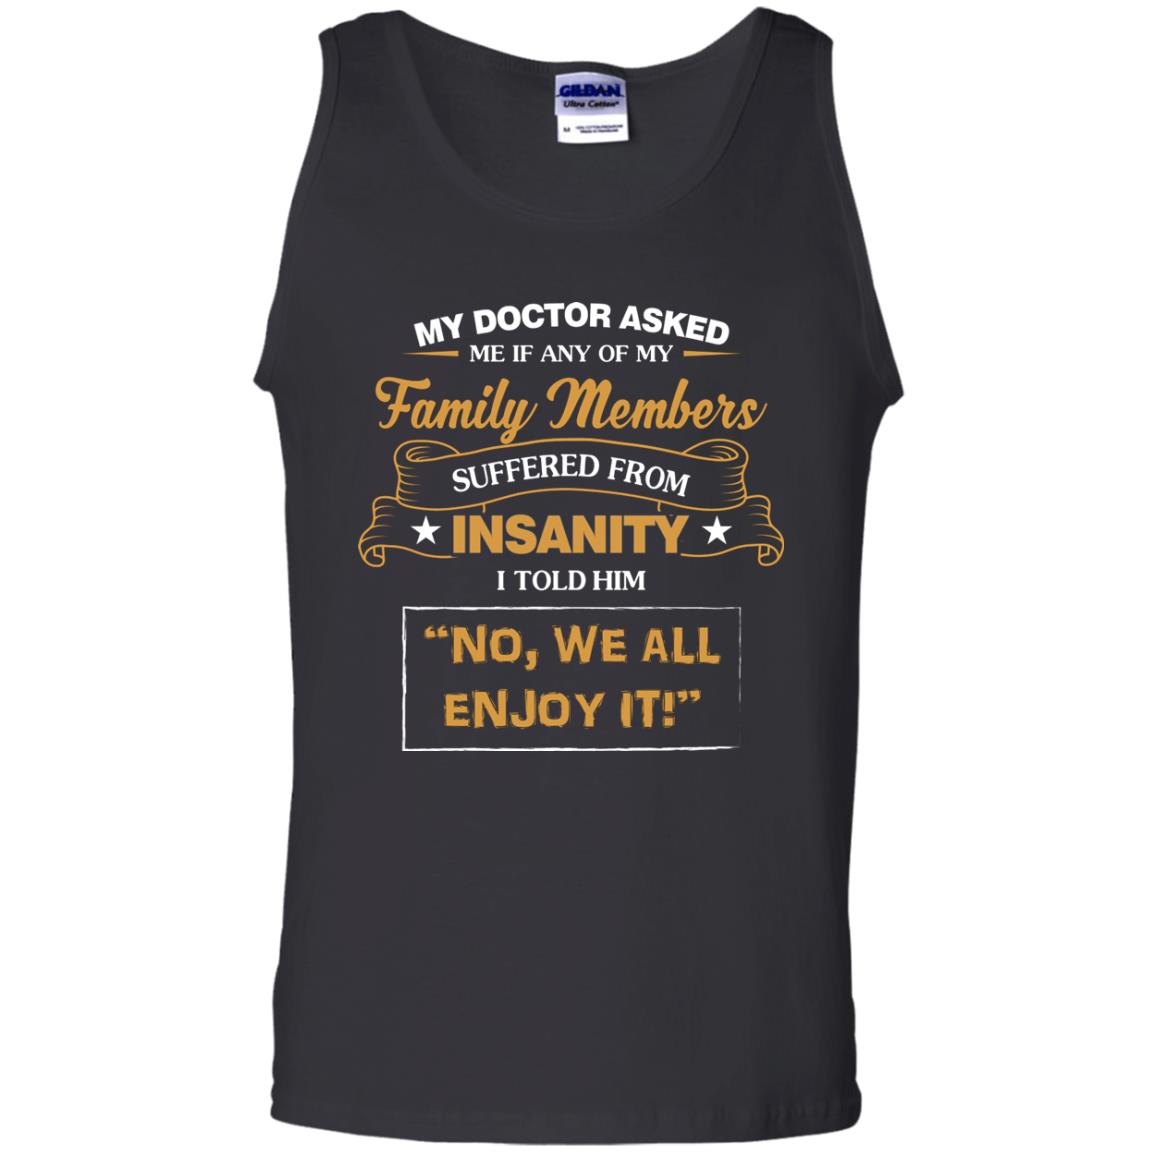 My Doctor Asked Me If Any Of My Family Members Suffered From InsanityG220 Gildan 100% Cotton Tank Top